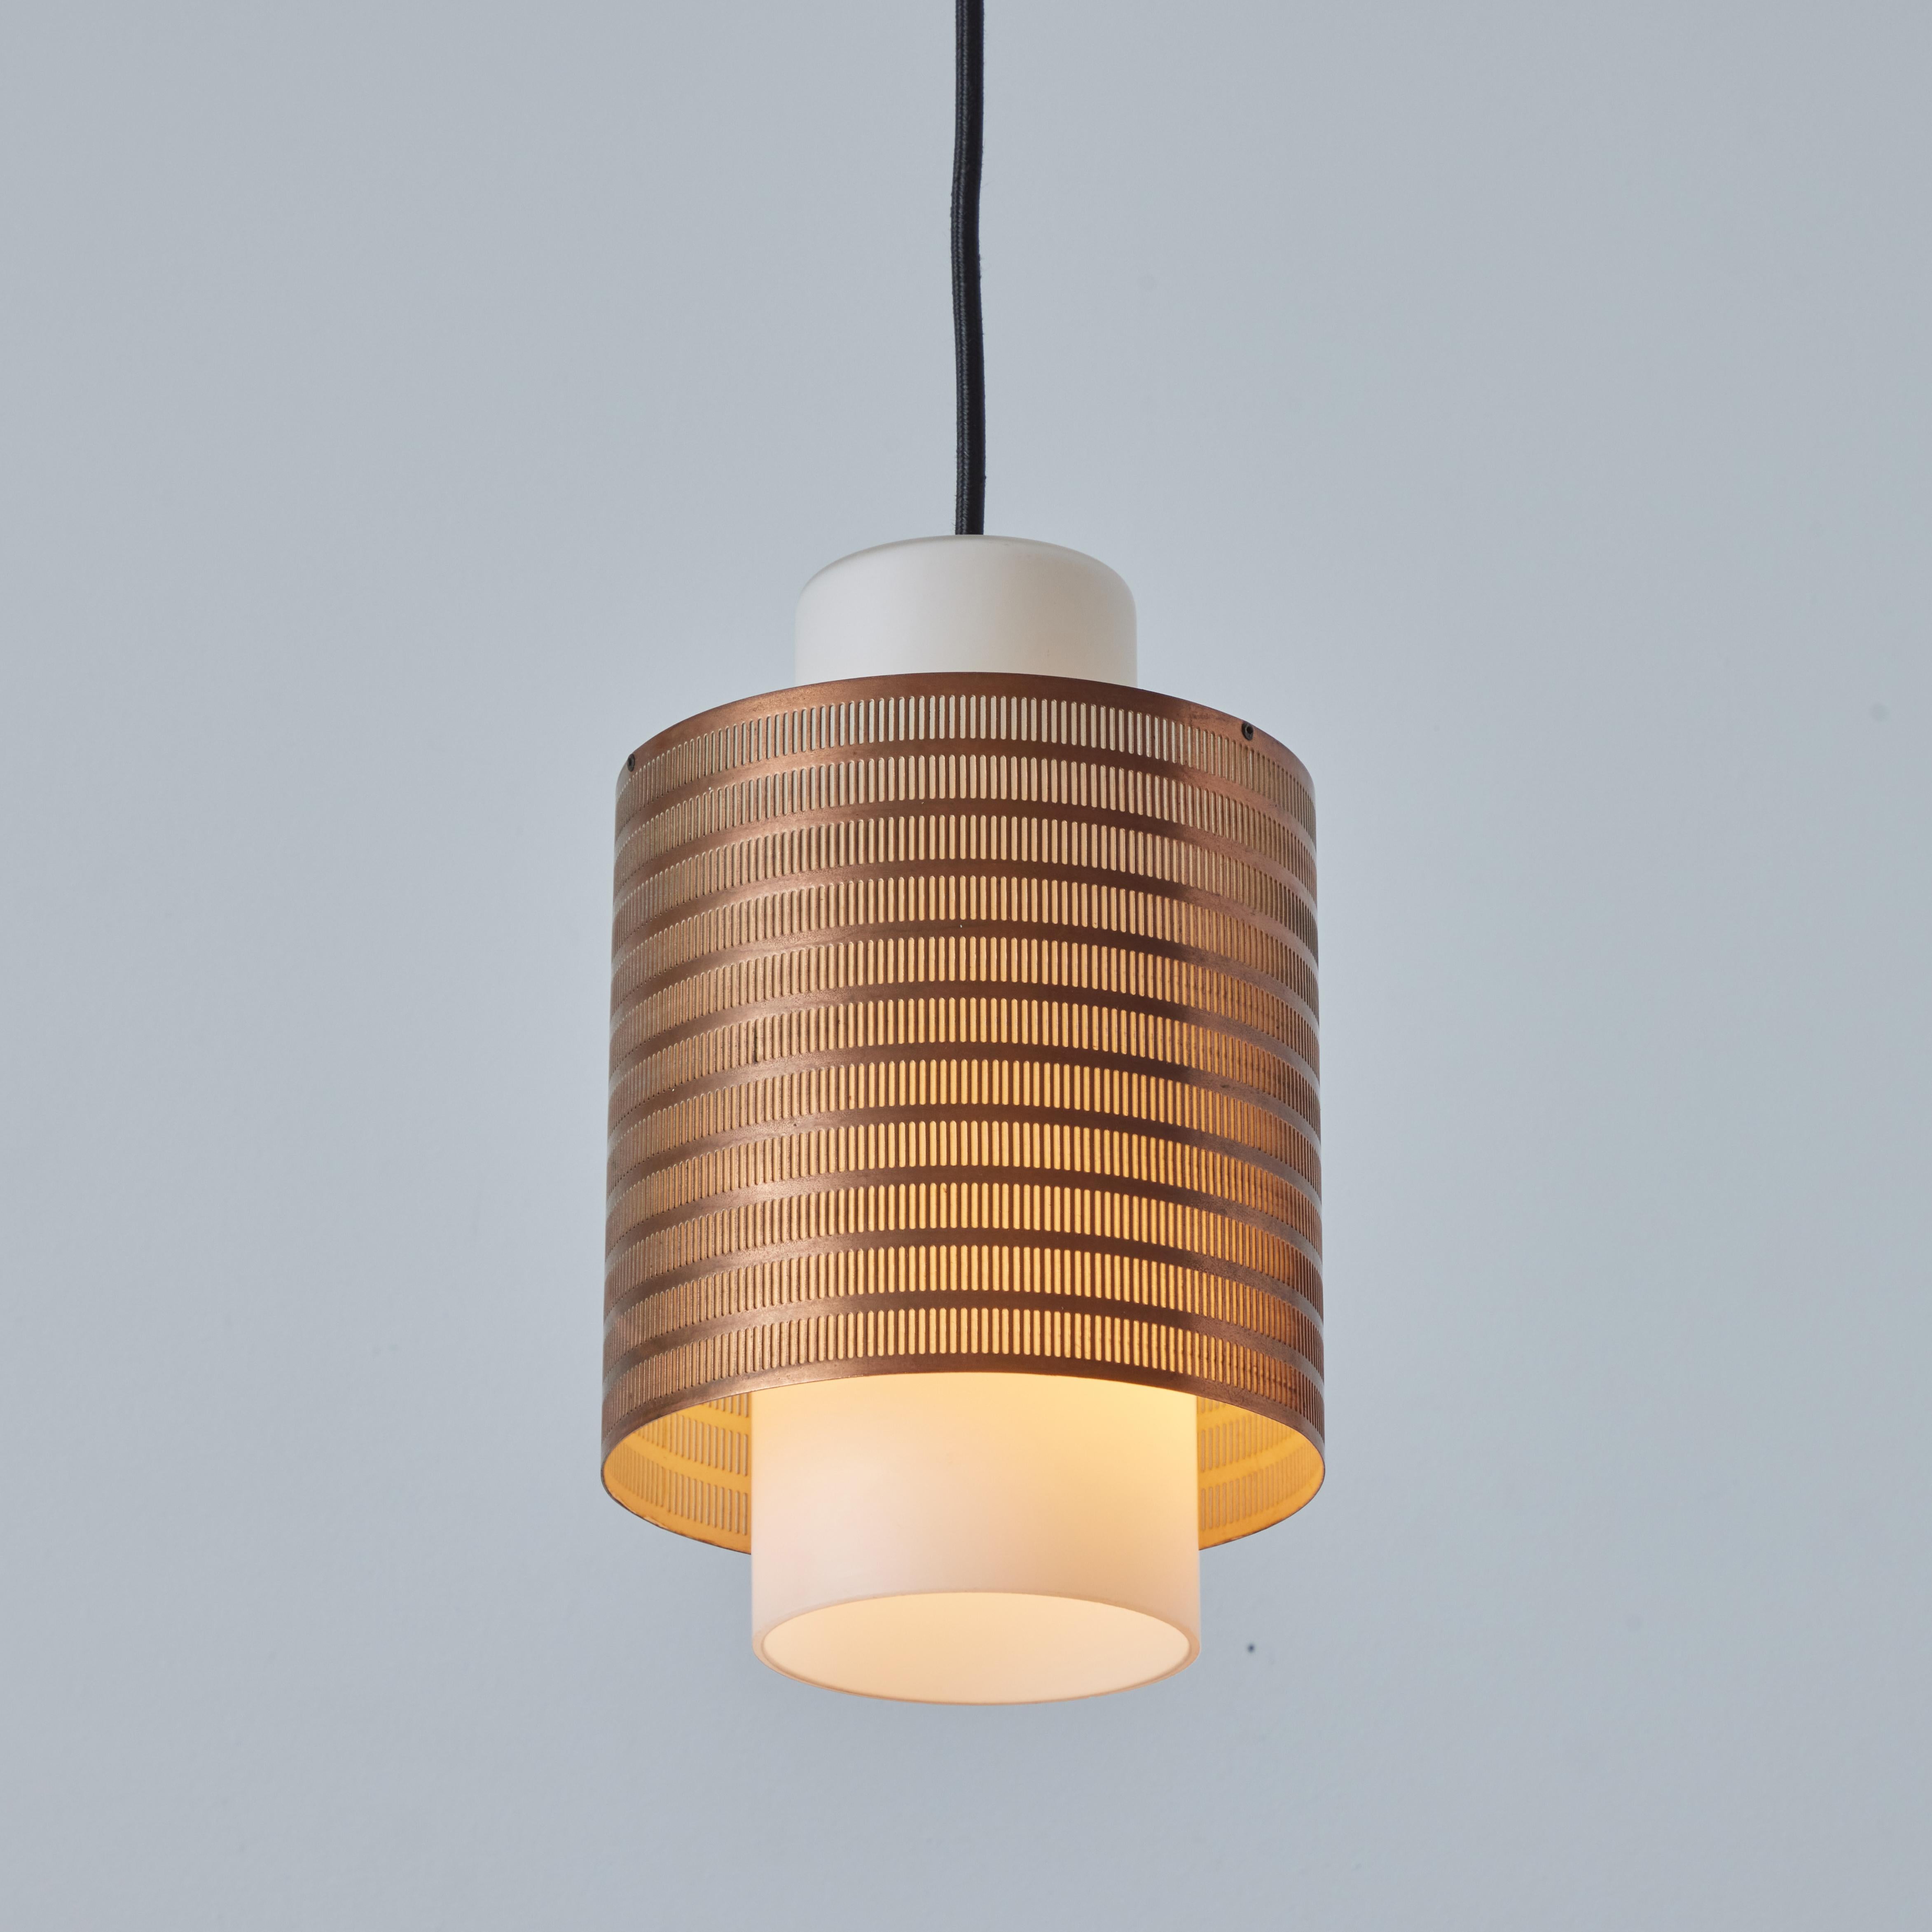 1960s Danish Modern Perforated Copper and Glass Pendant Attributed to Lyfa For Sale 4